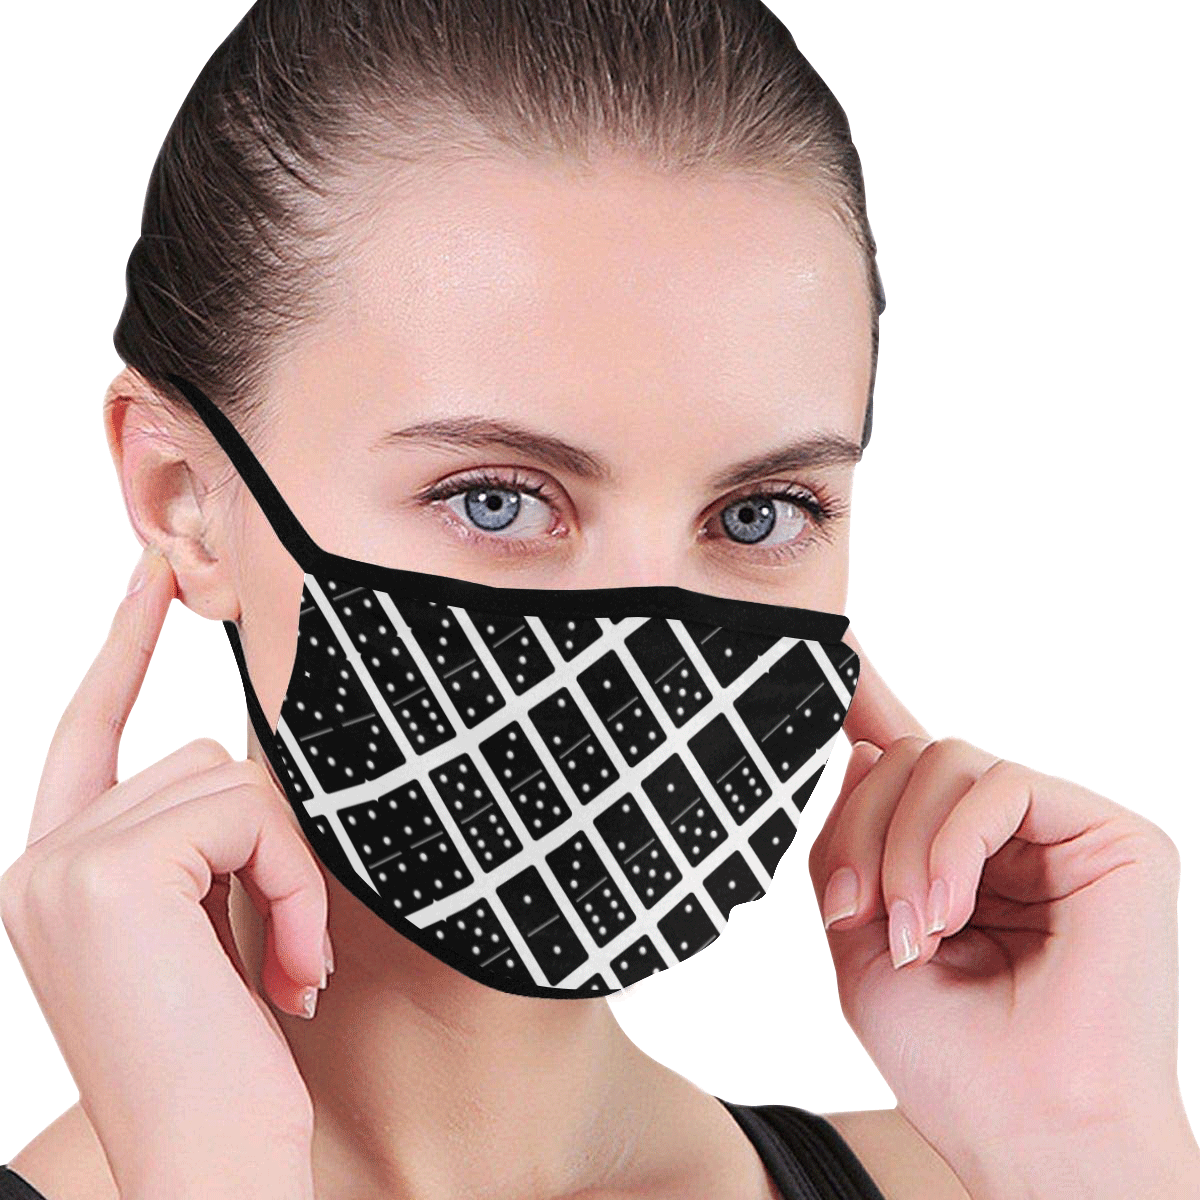 DOMINOES Mouth Mask